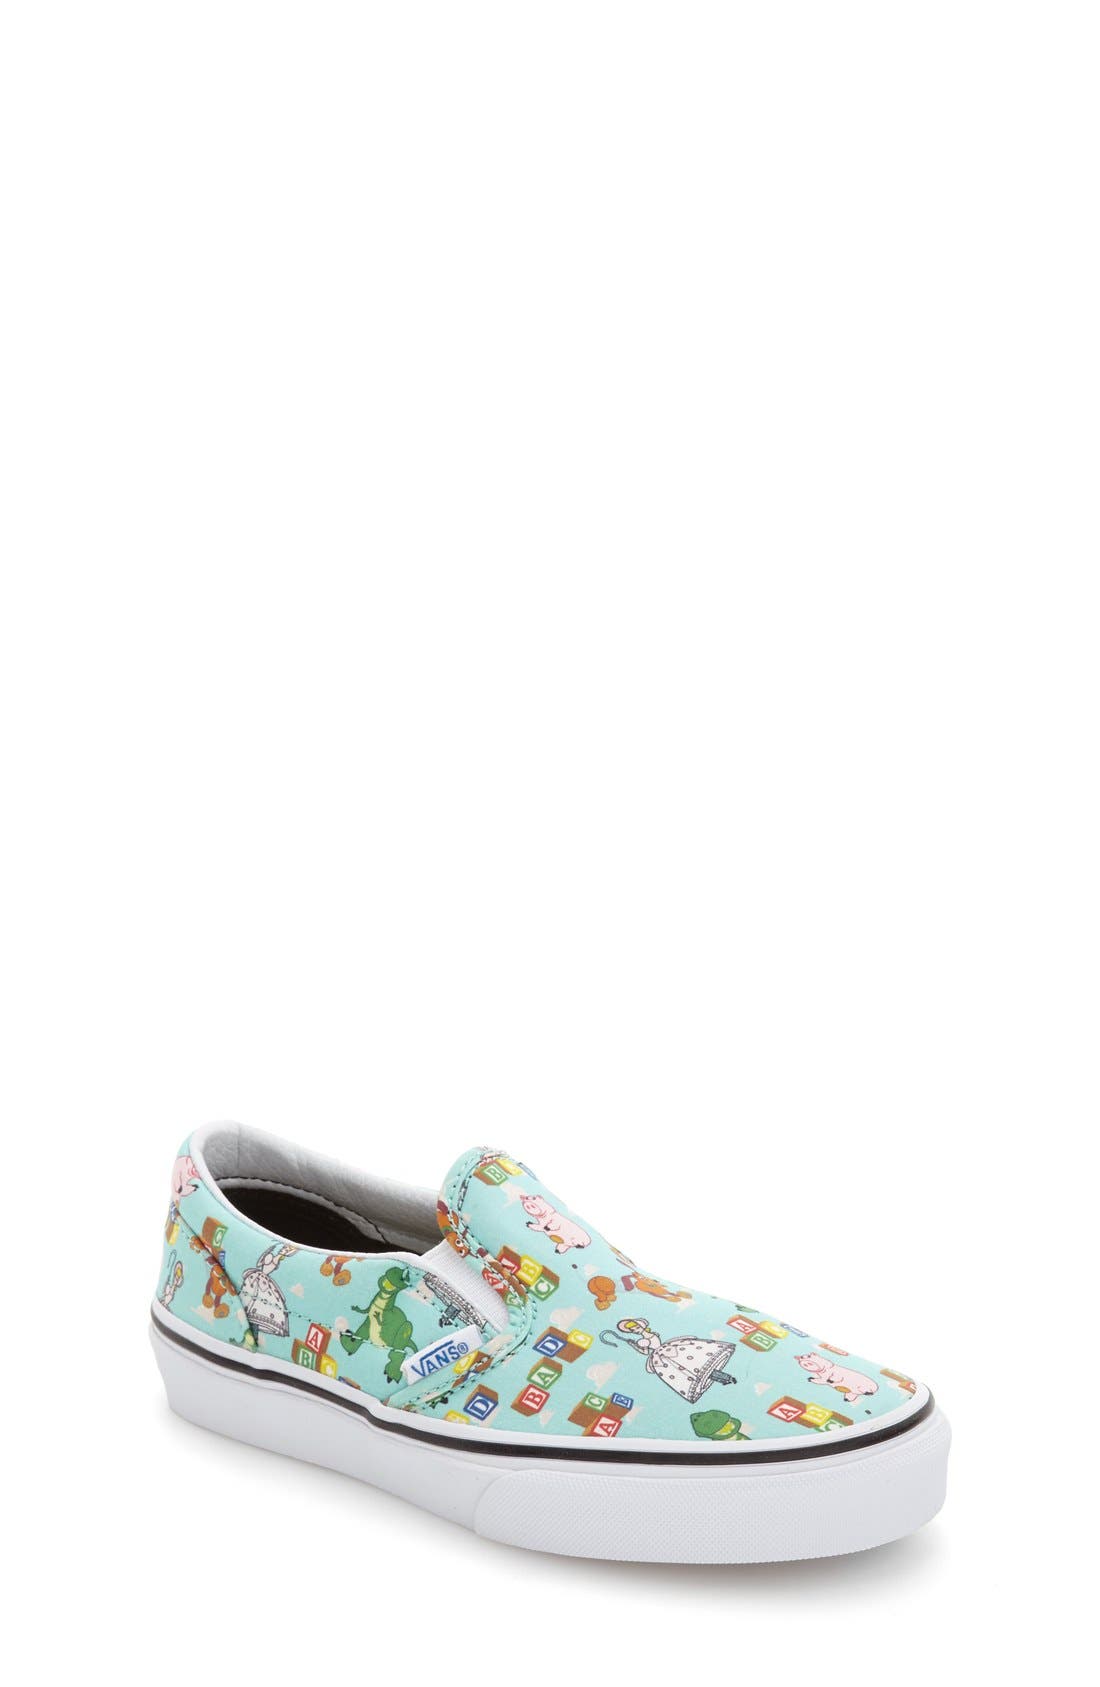 toy story vans womens size 9